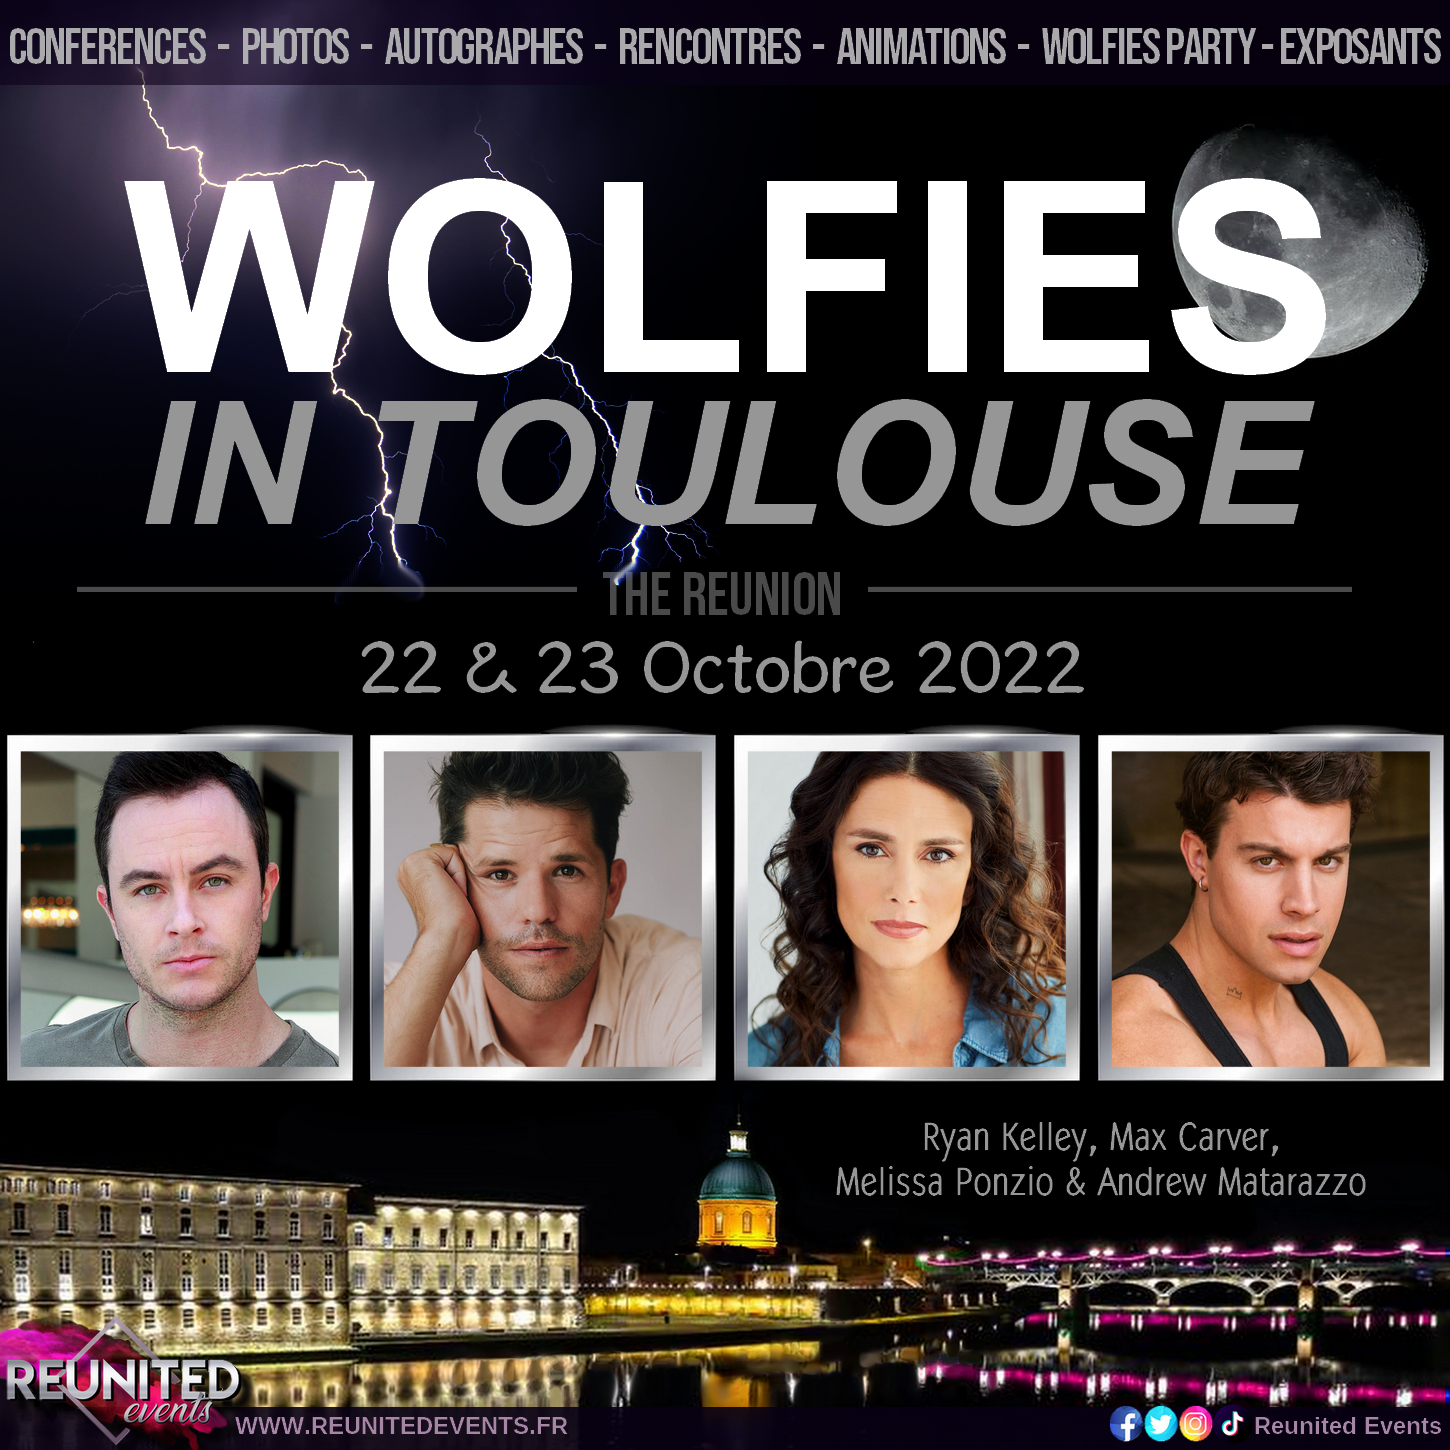 Wolfies in toulouse 2022